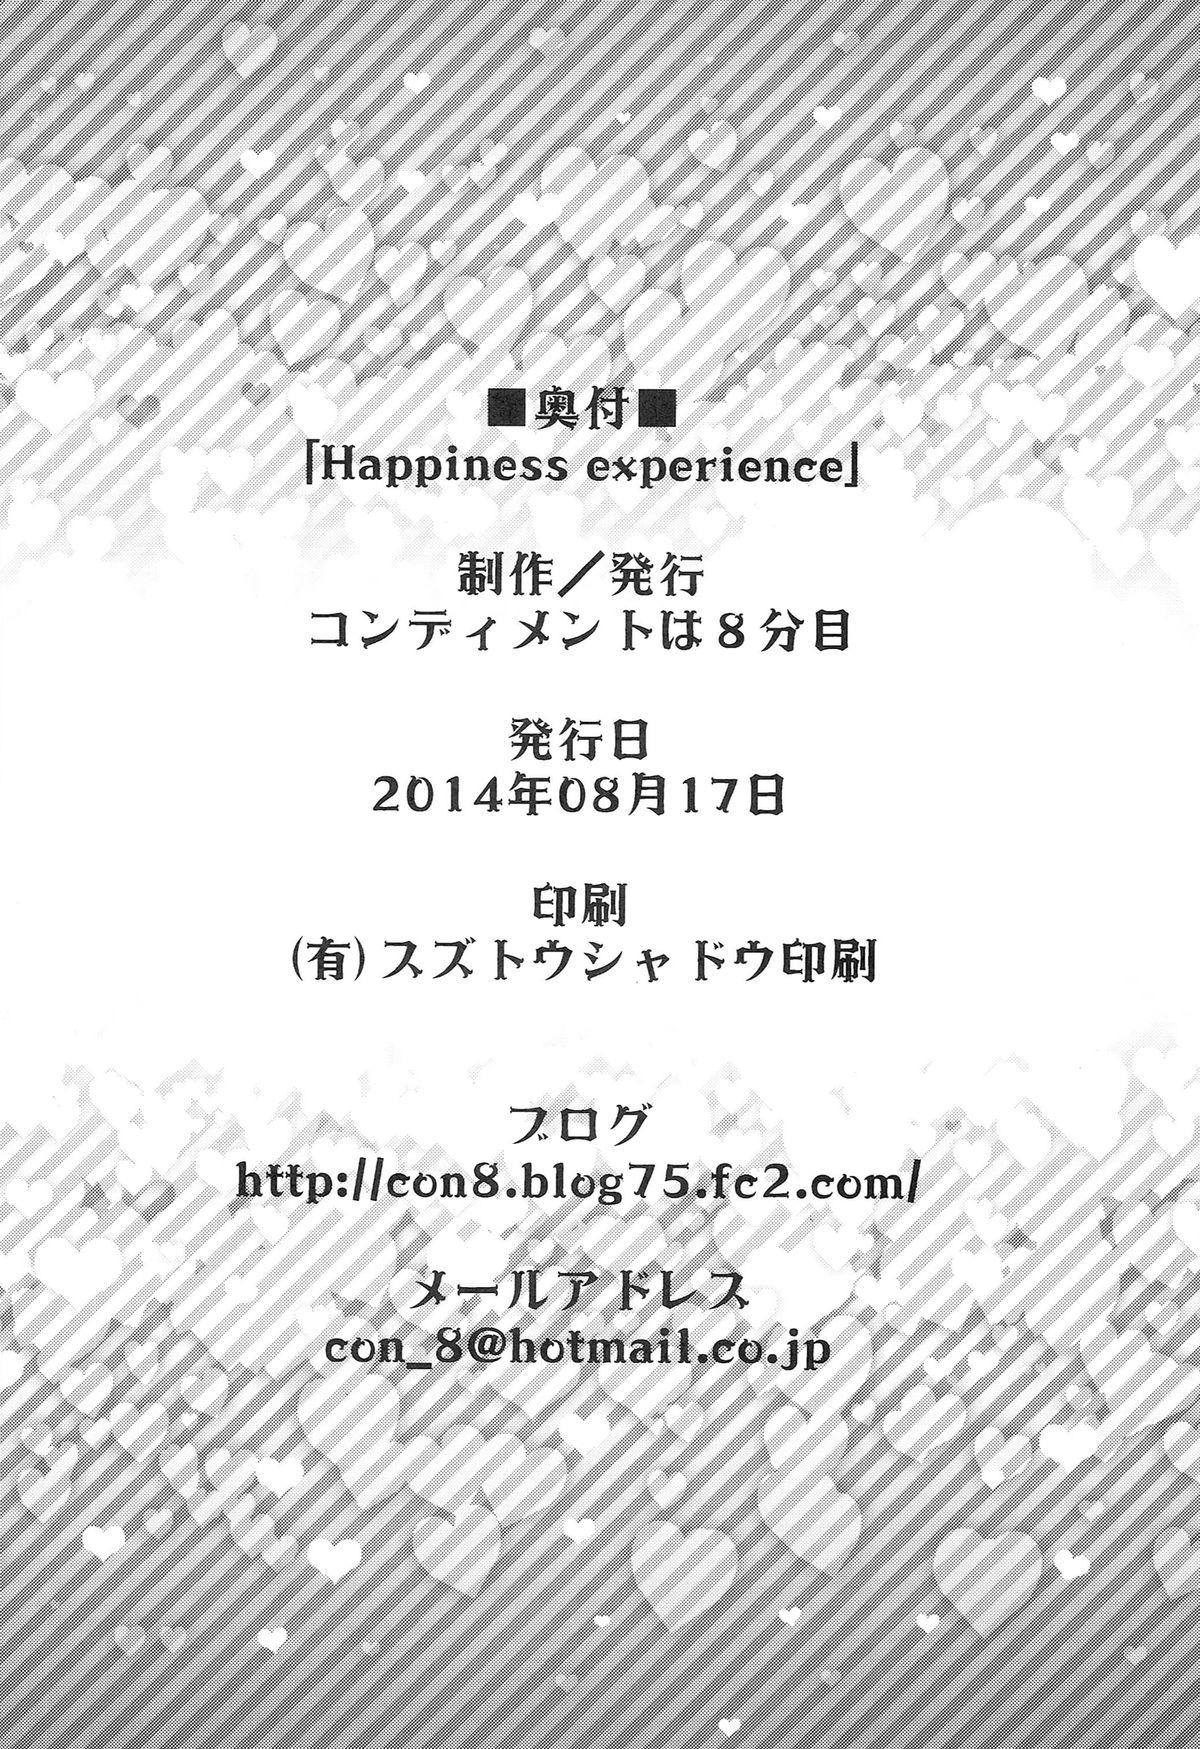 Happiness experience 39